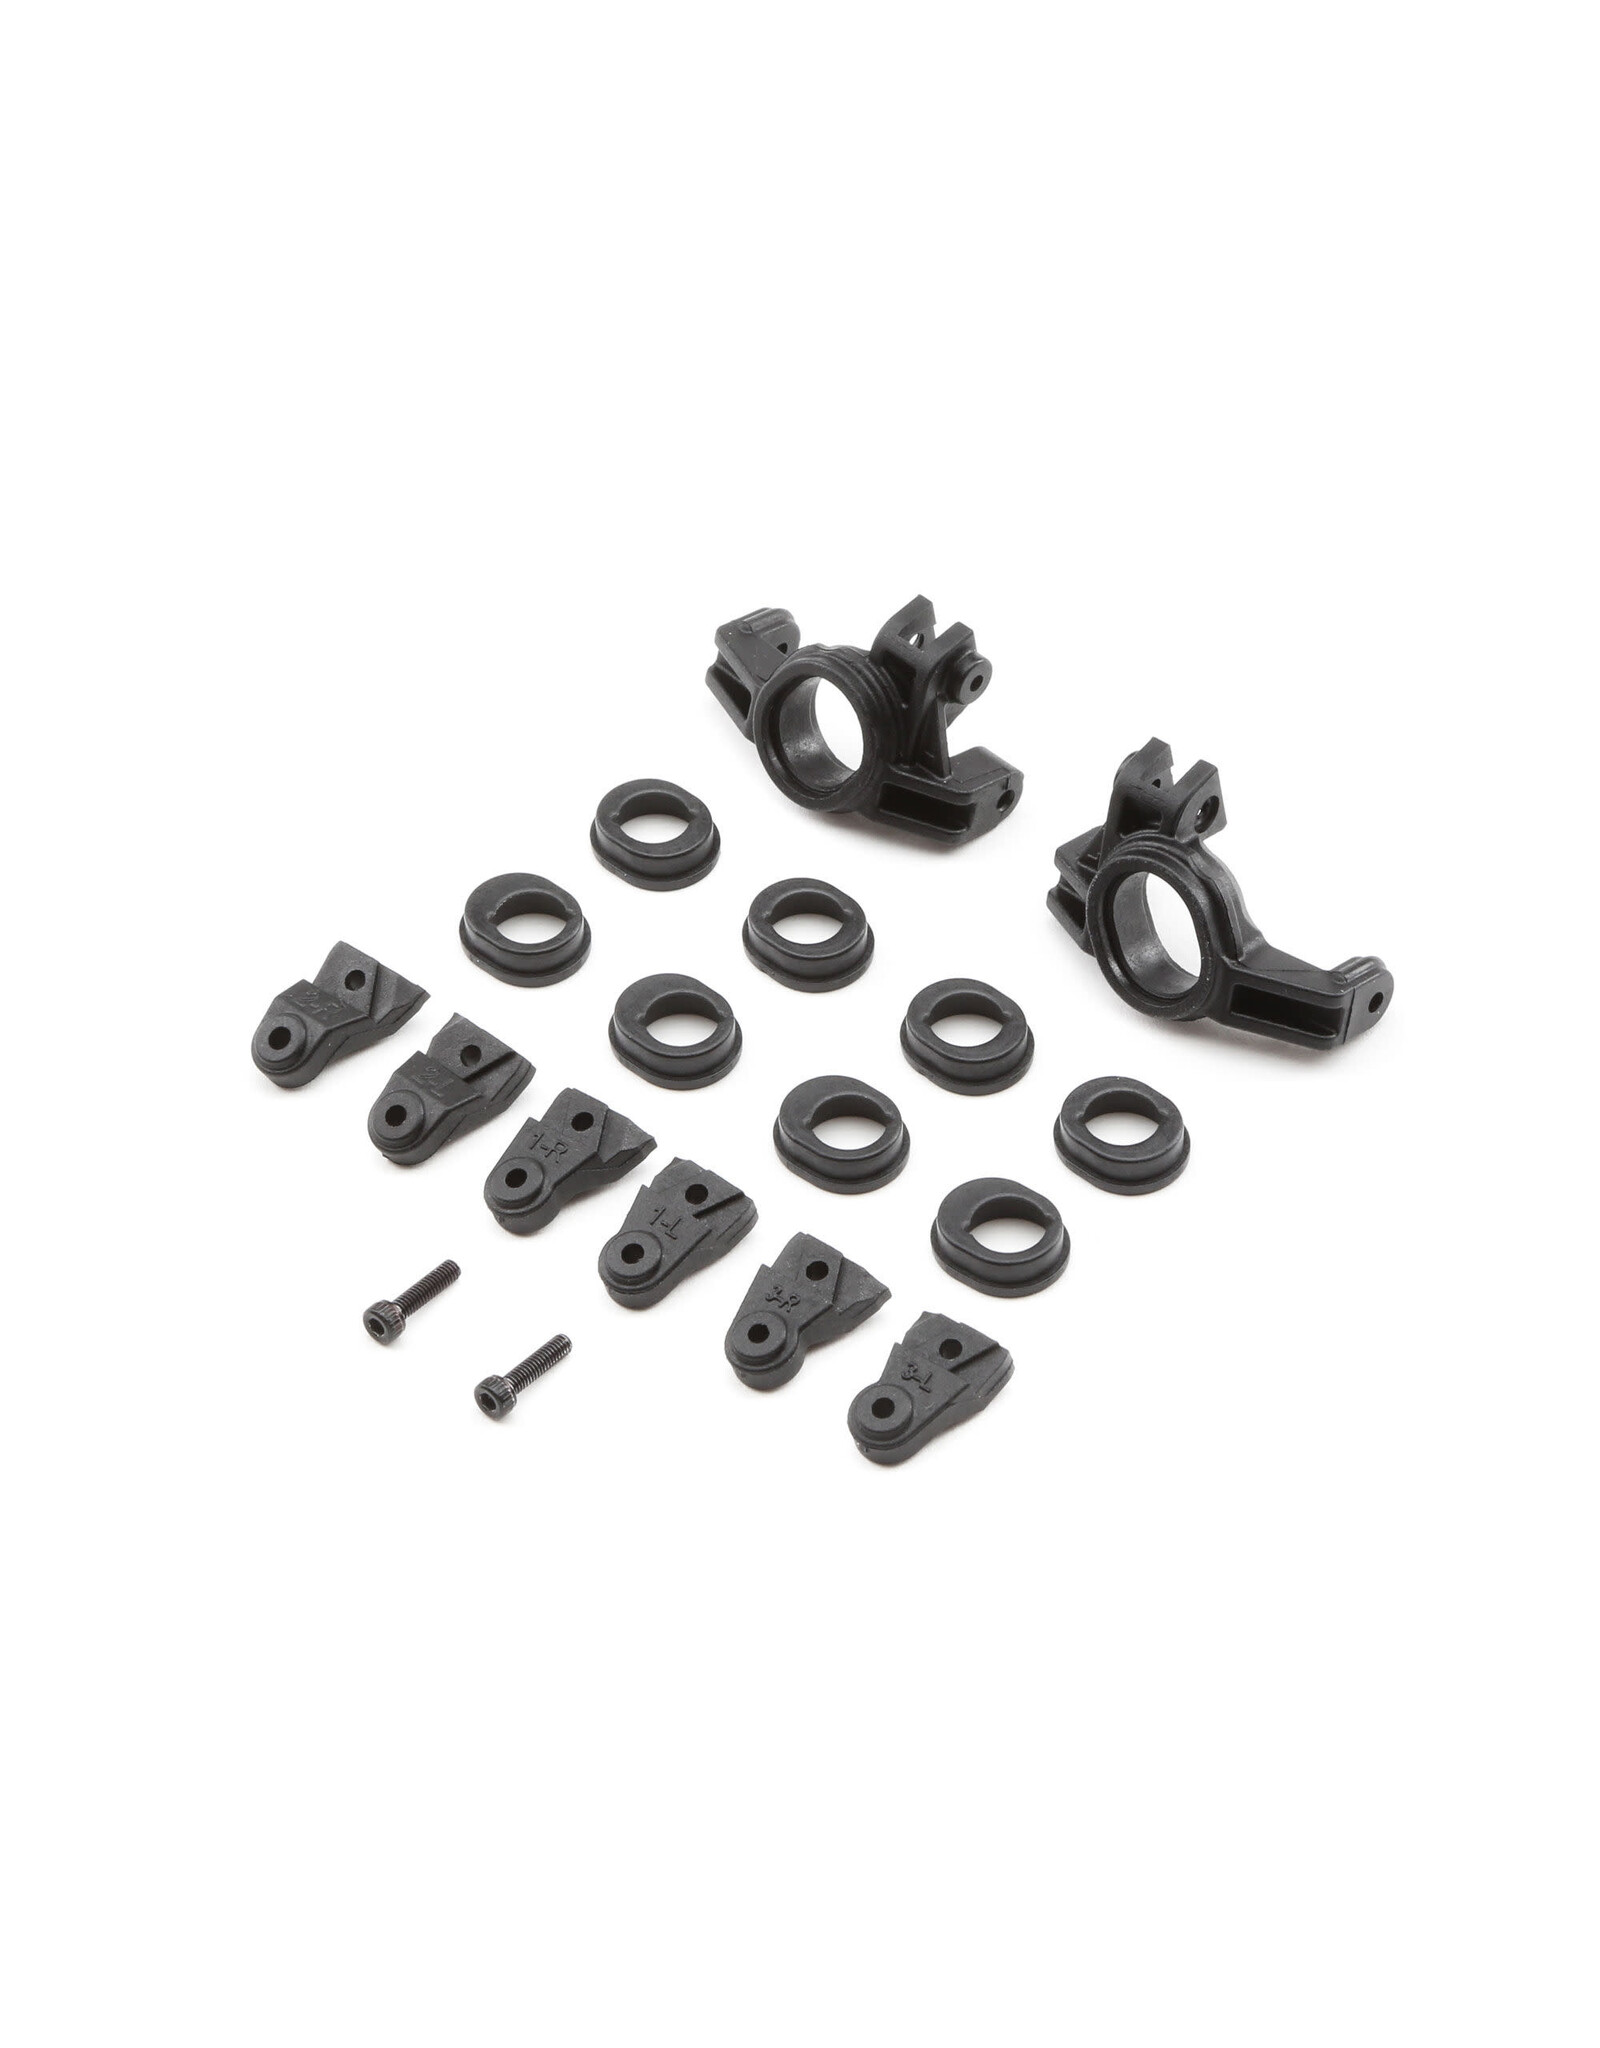 Team Losi Racing Front Spindle Set: All 22